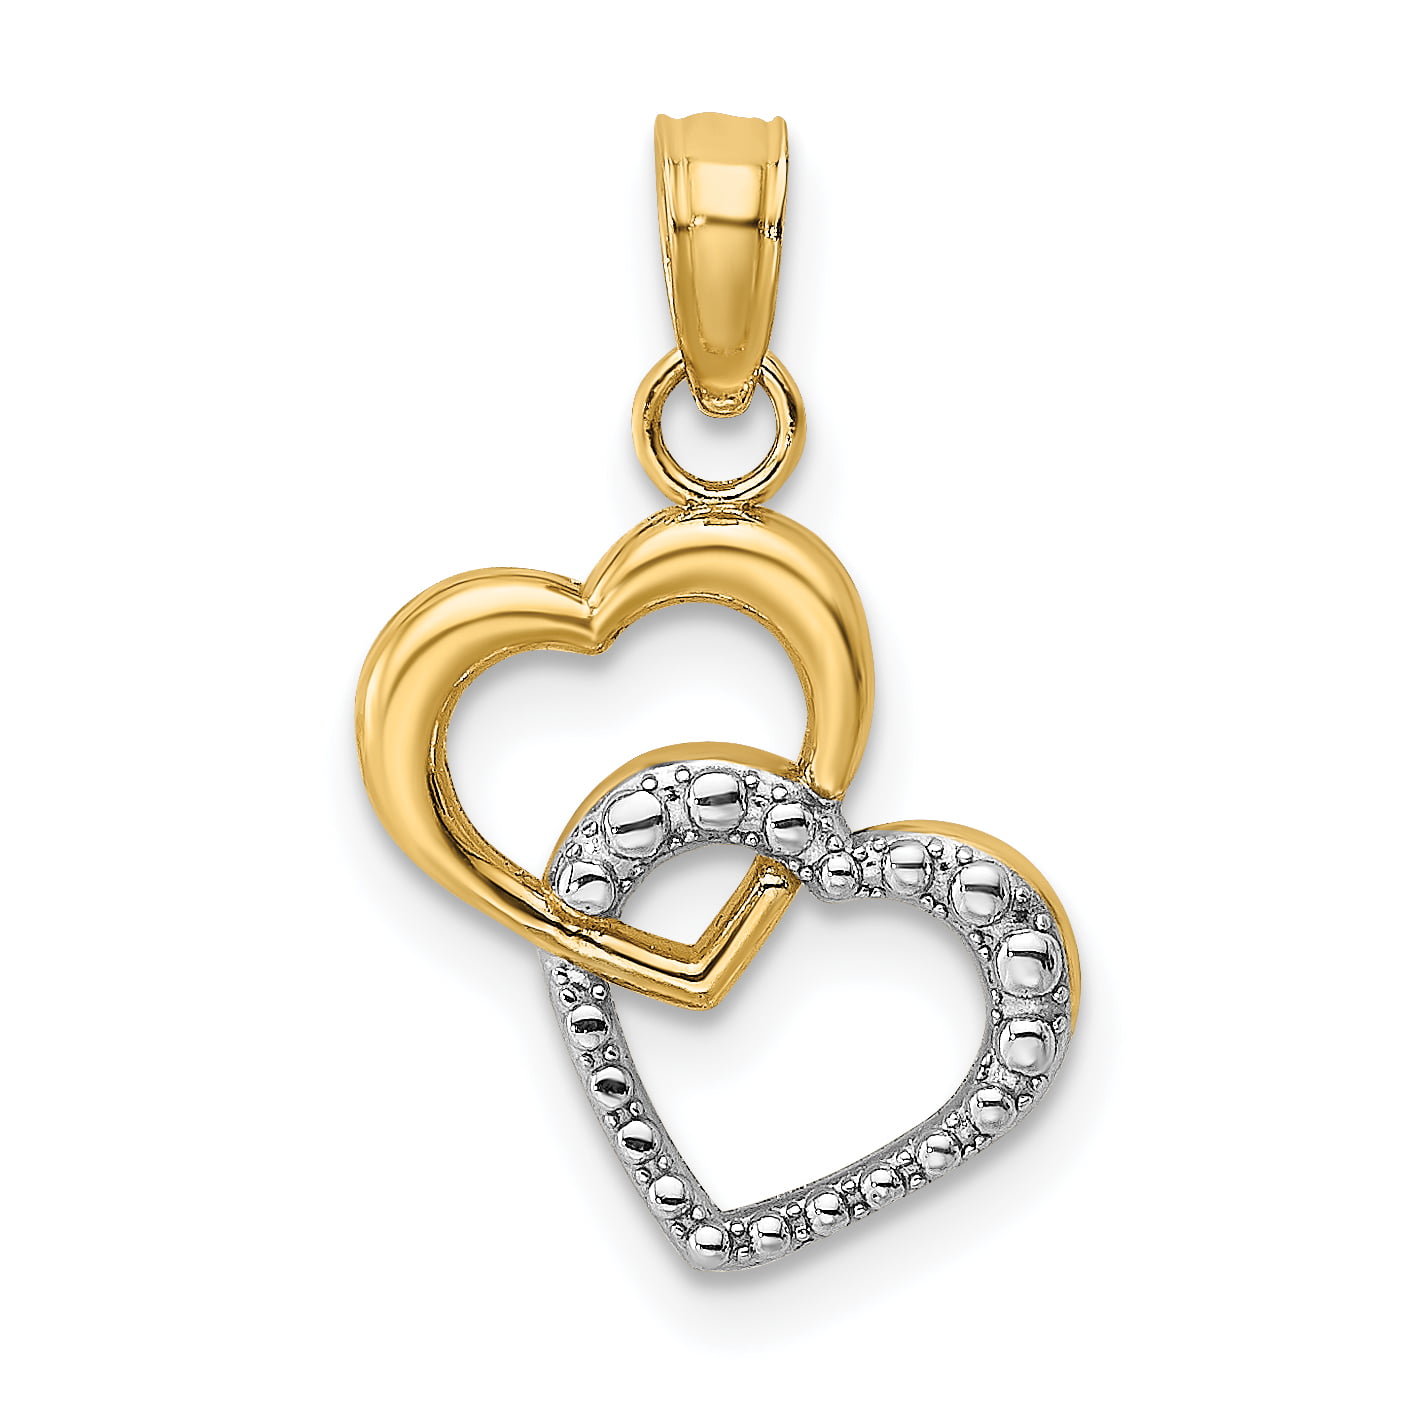 0.9IN long x 0.6IN wide 14k White Gold Etched Design 0.013 Gauge Engravable Heart Charm